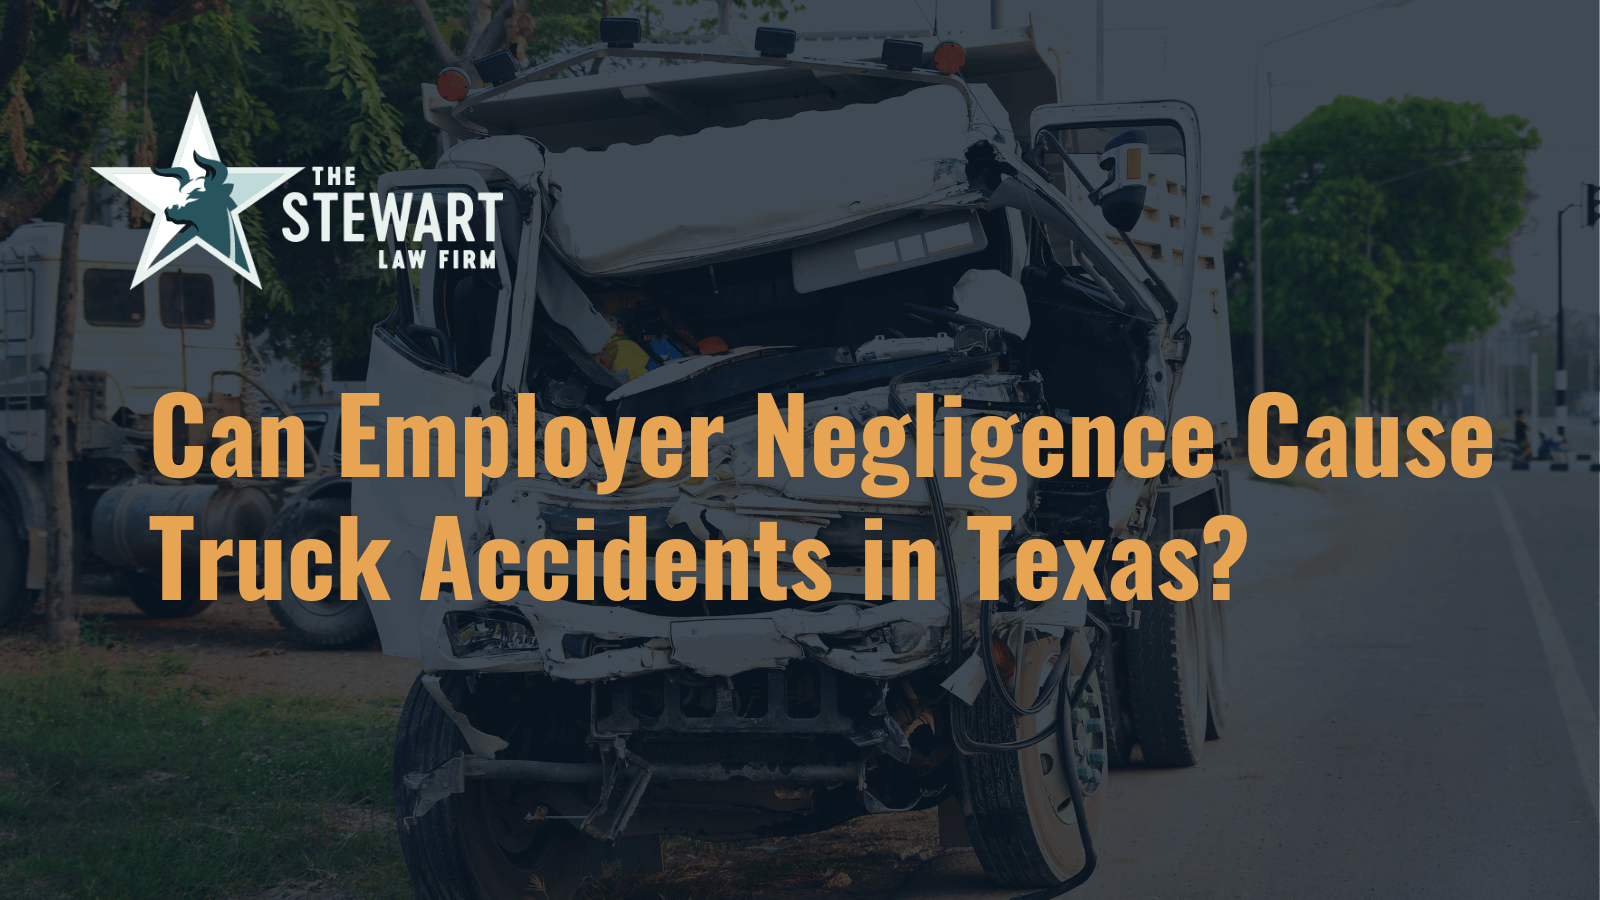 Can Employer Negligence Cause Truck Accidents in Texas - the stewart law firm - austin texas personal injury lawyer